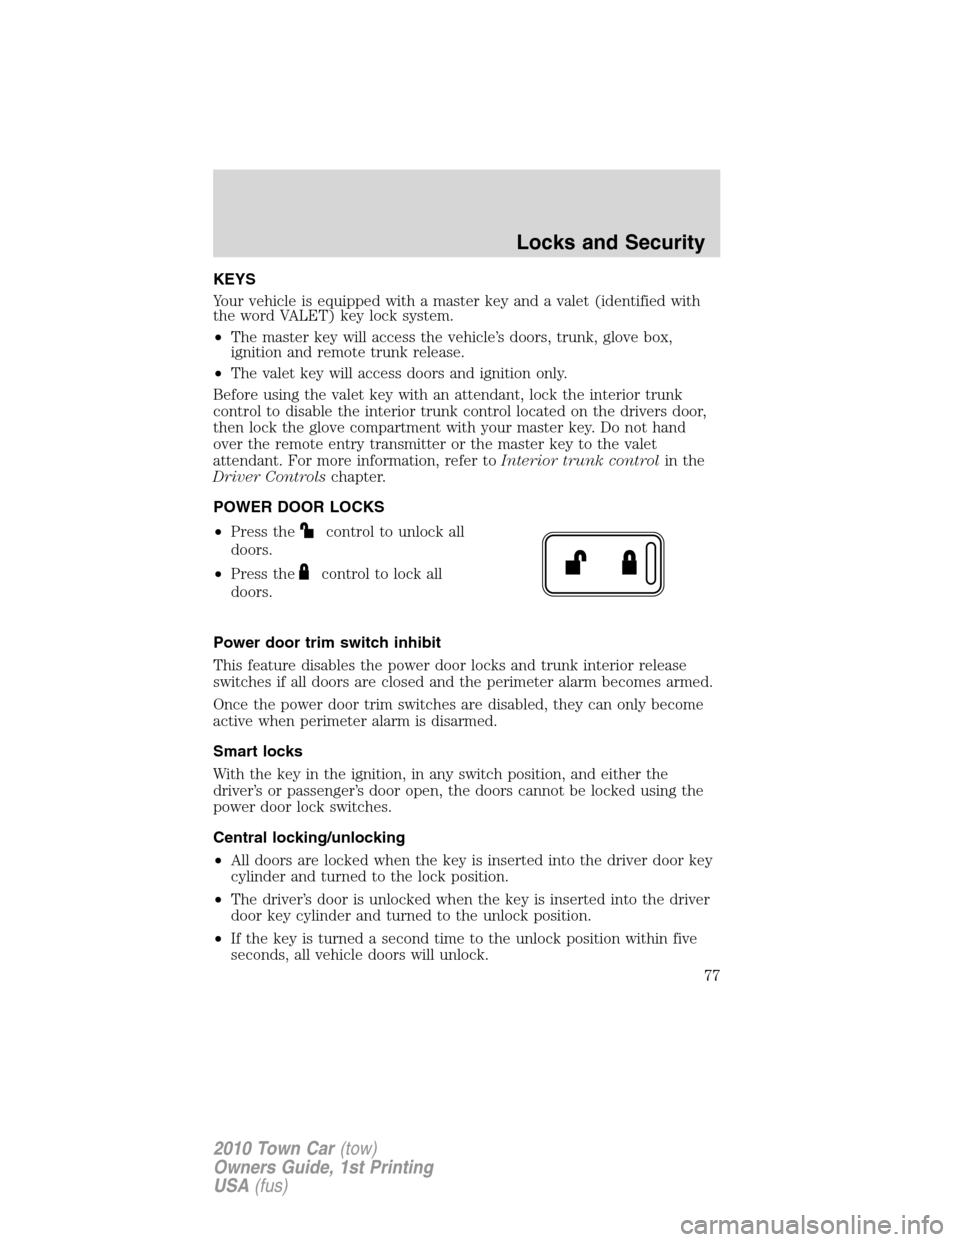 LINCOLN TOWN CAR 2010 Manual PDF KEYS
Your vehicle is equipped with a master key and a valet (identified with
the word VALET) key lock system.
•The master key will access the vehicle’s doors, trunk, glove box,
ignition and remote